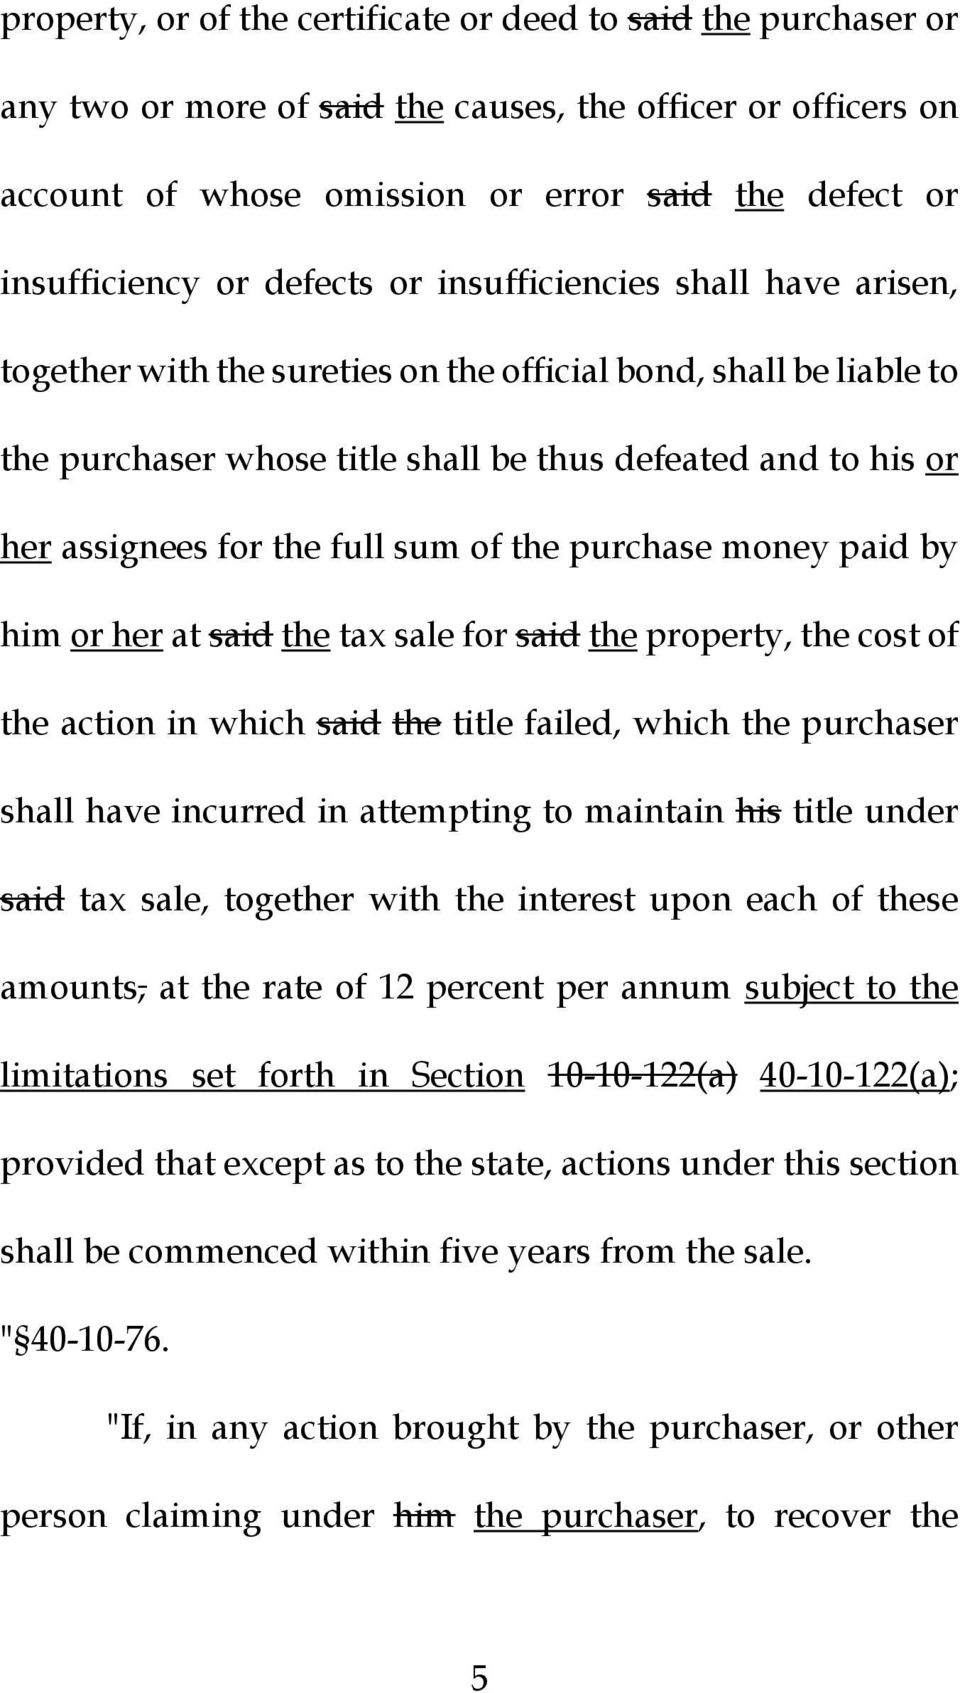 full sum of the purchase money paid by him or her at said the tax sale for said the property, the cost of the action in which said the title failed, which the purchaser shall have incurred in